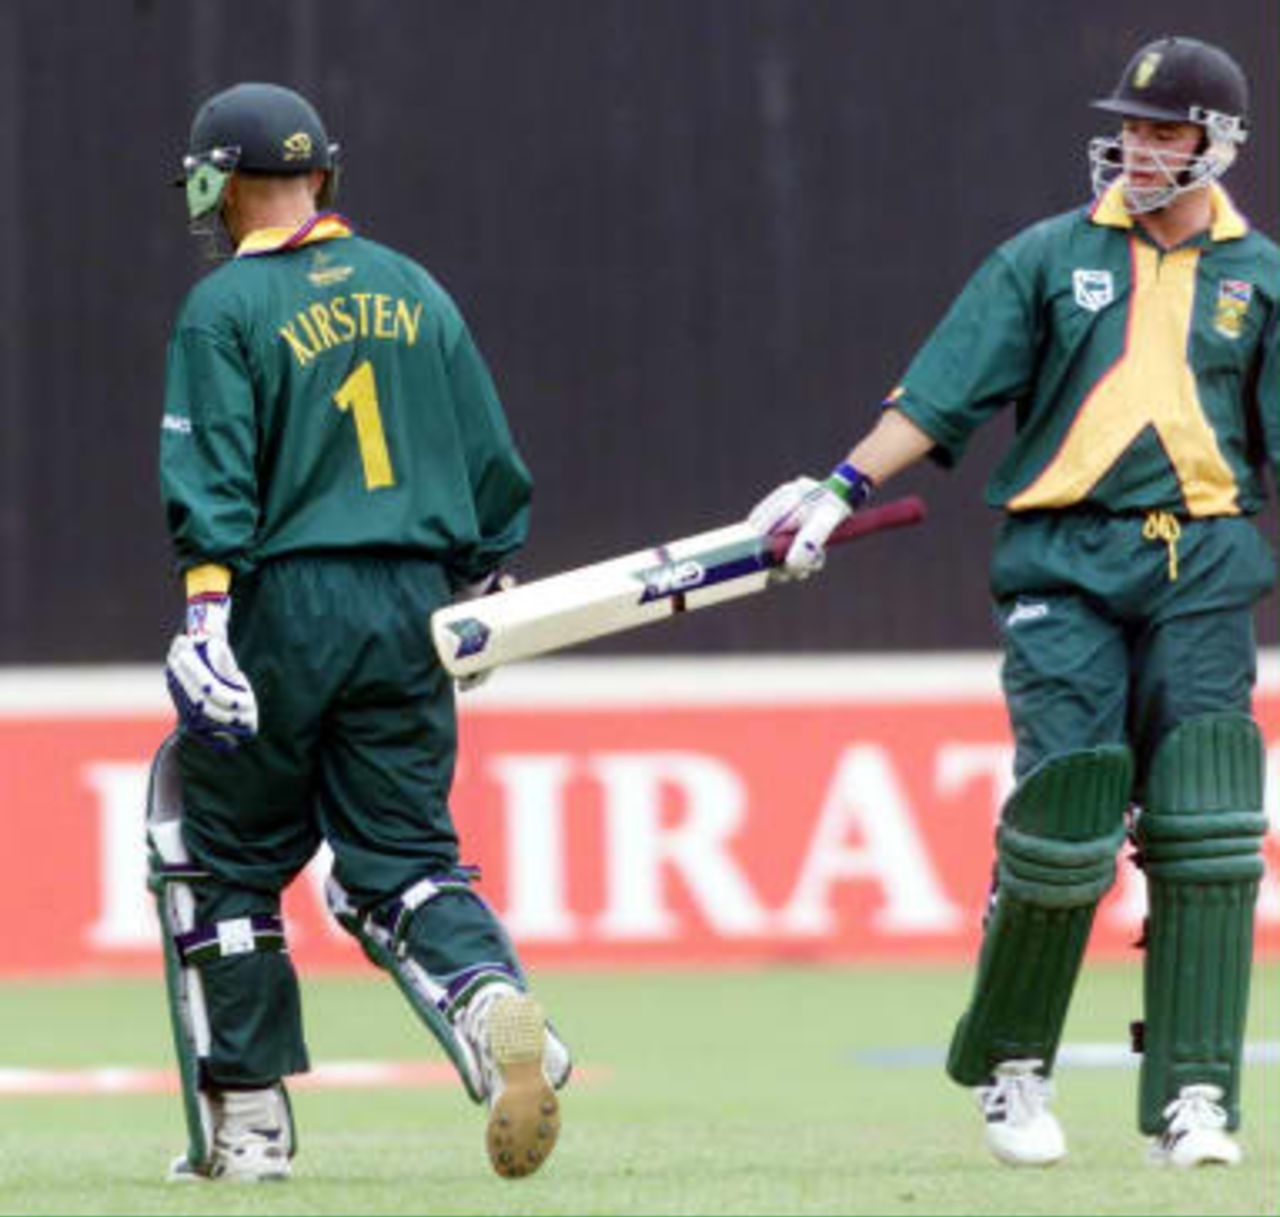 South Africa's Herschelle Gibbs congratulates Gary Kirsten after the couple hit an opening partnership of 176 runs 10 June 99, during their Super Six match against New Zealand in the Cricket World Cup at Edgbaston, Birmingham. The final will be at Lords on the 20 June 99